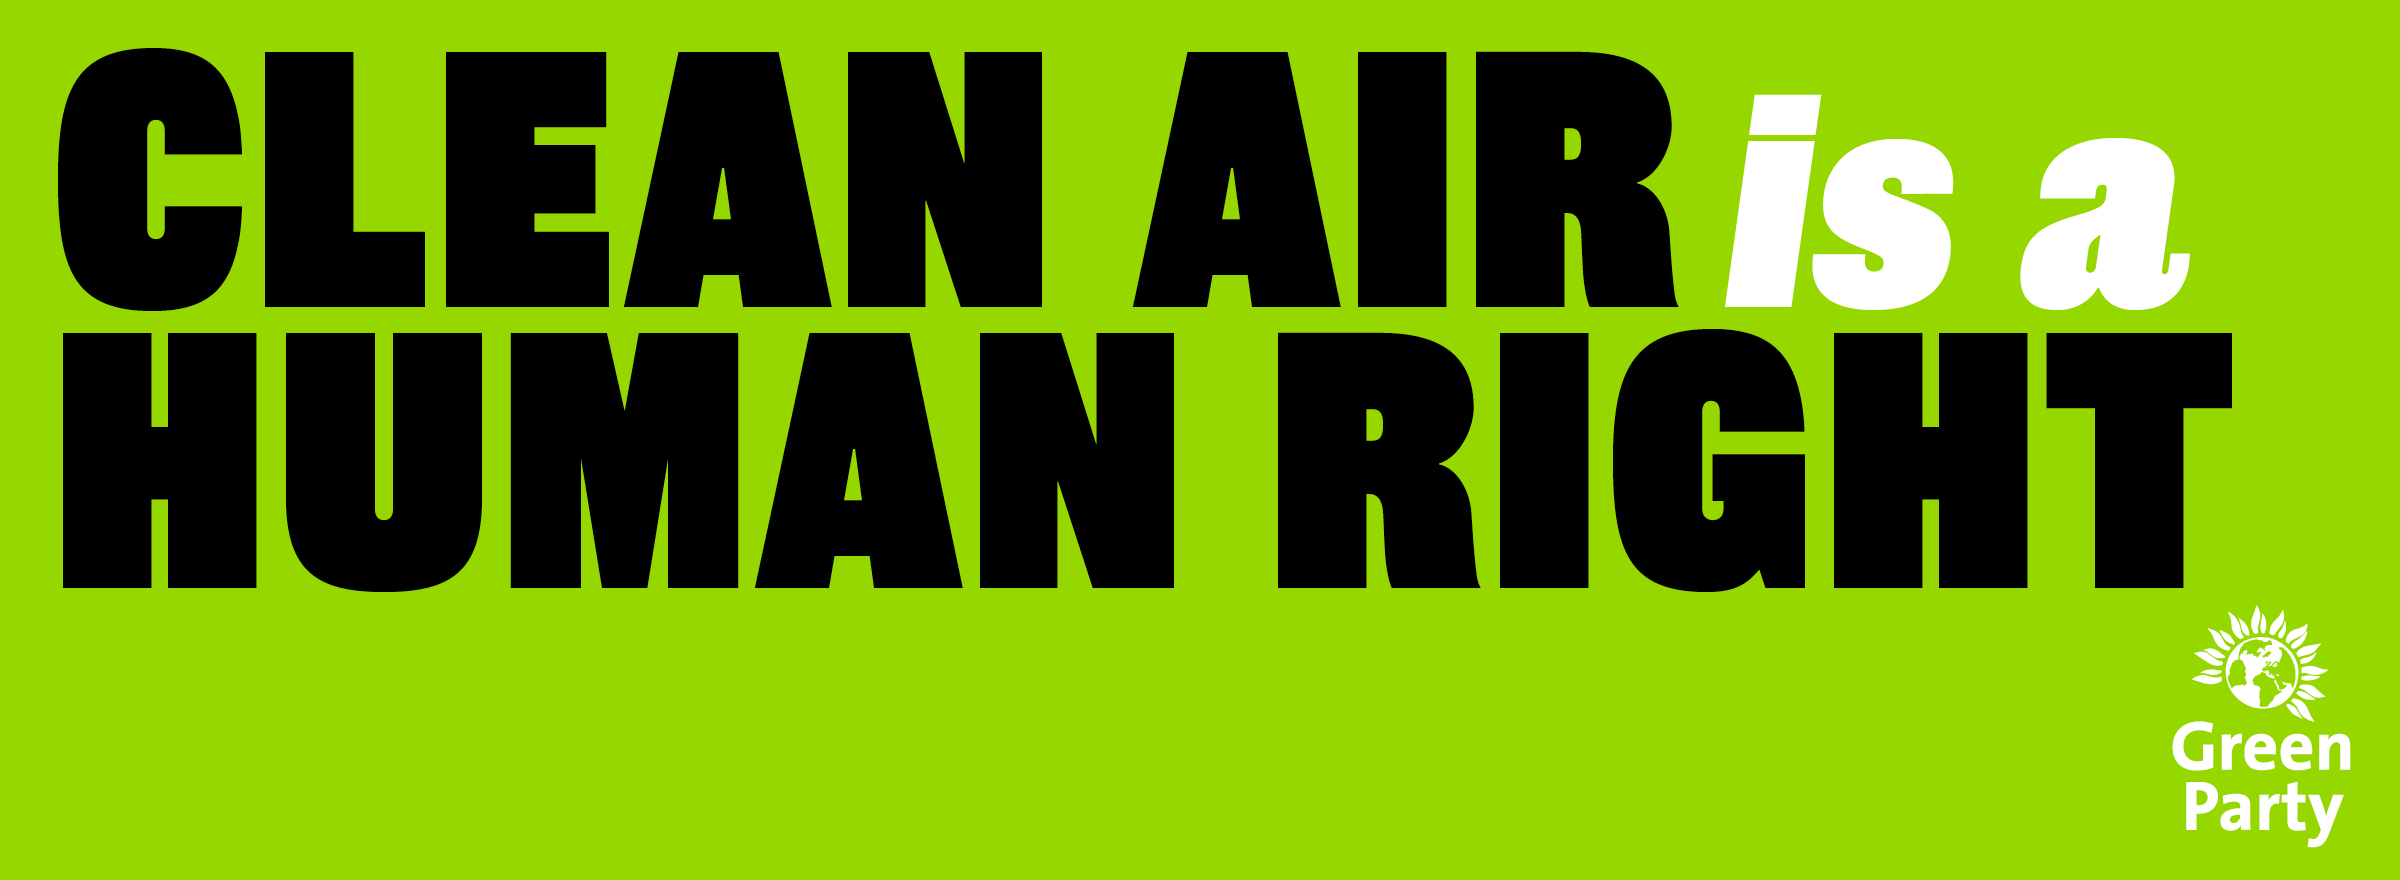 Clean Air is a Human Right